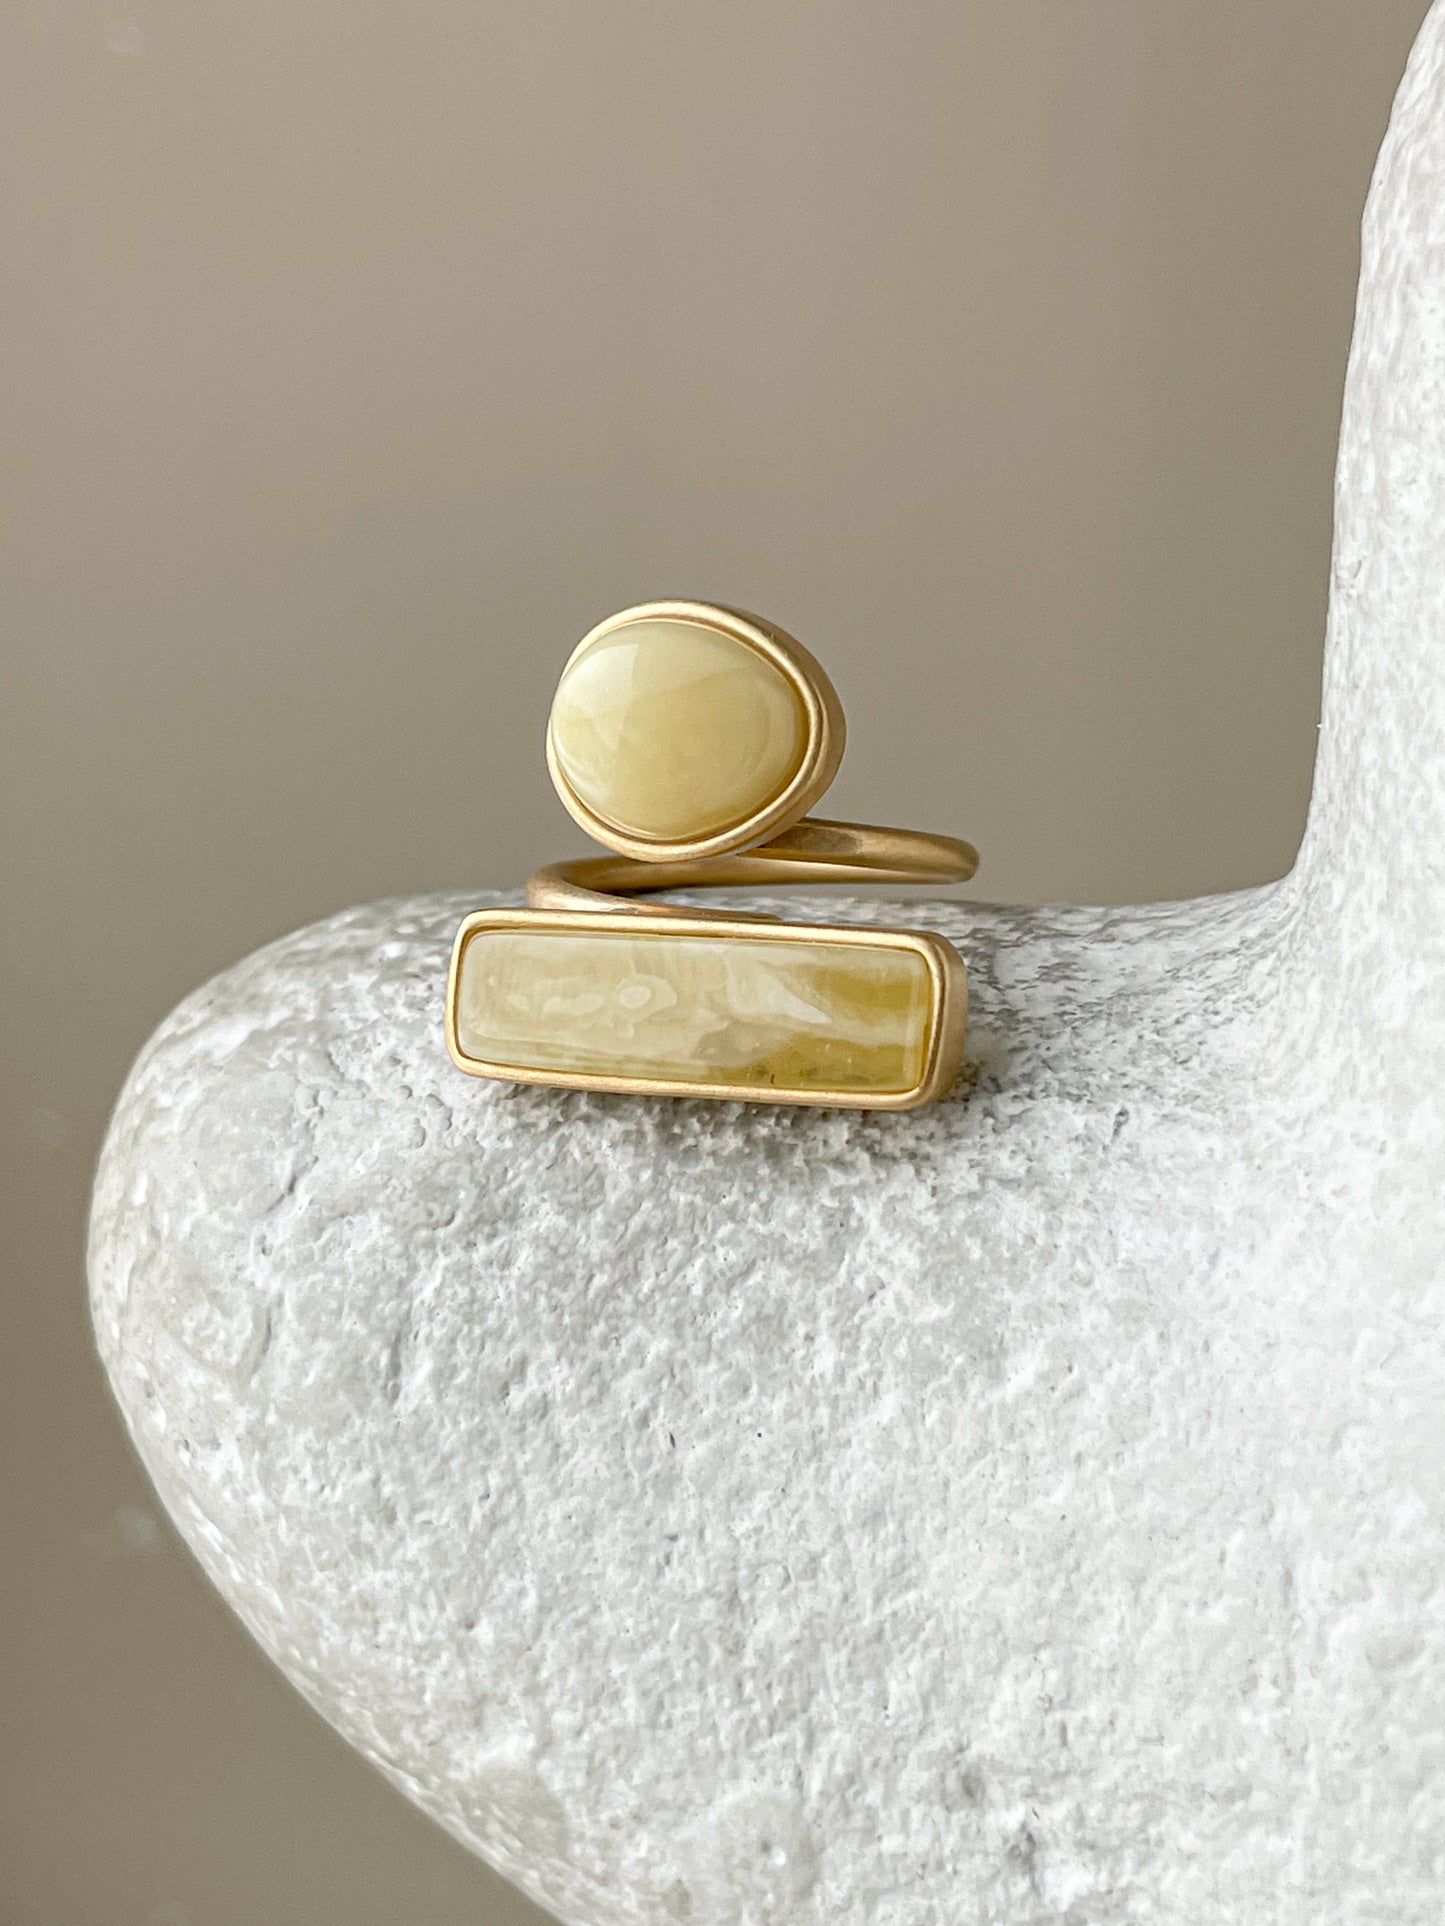 Matte amber ring - Gold plated Silver - Double stone ring collection - Size 5 1/2